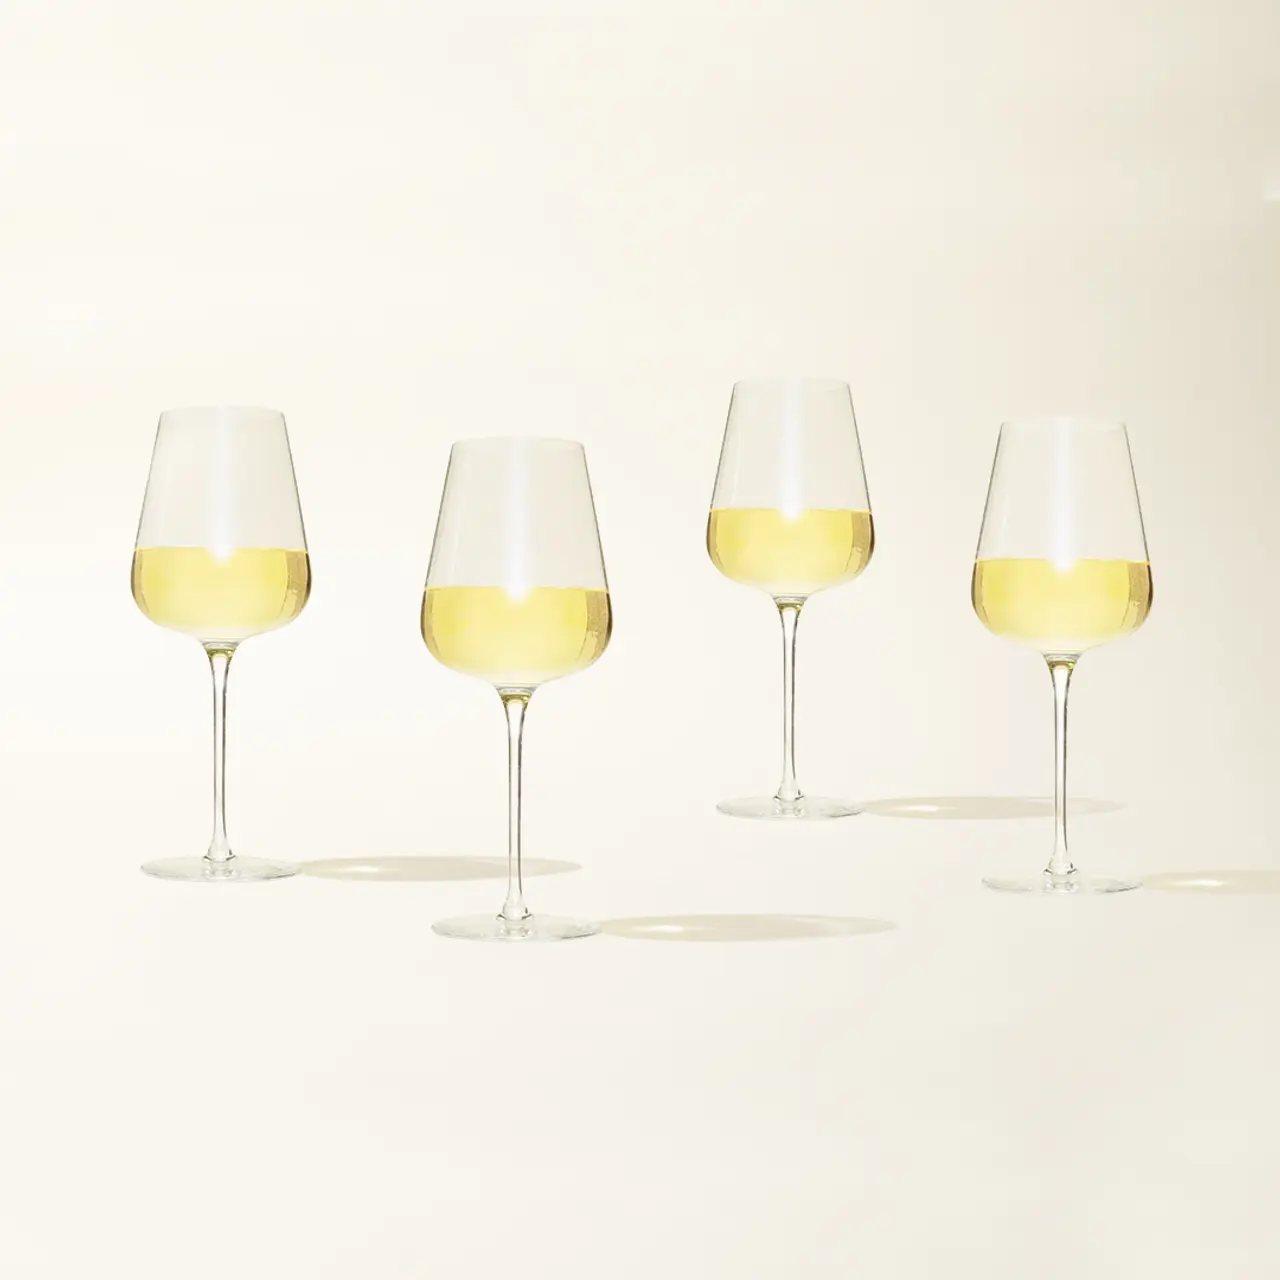 Four wine glasses filled with white wine are lined up on a light background.